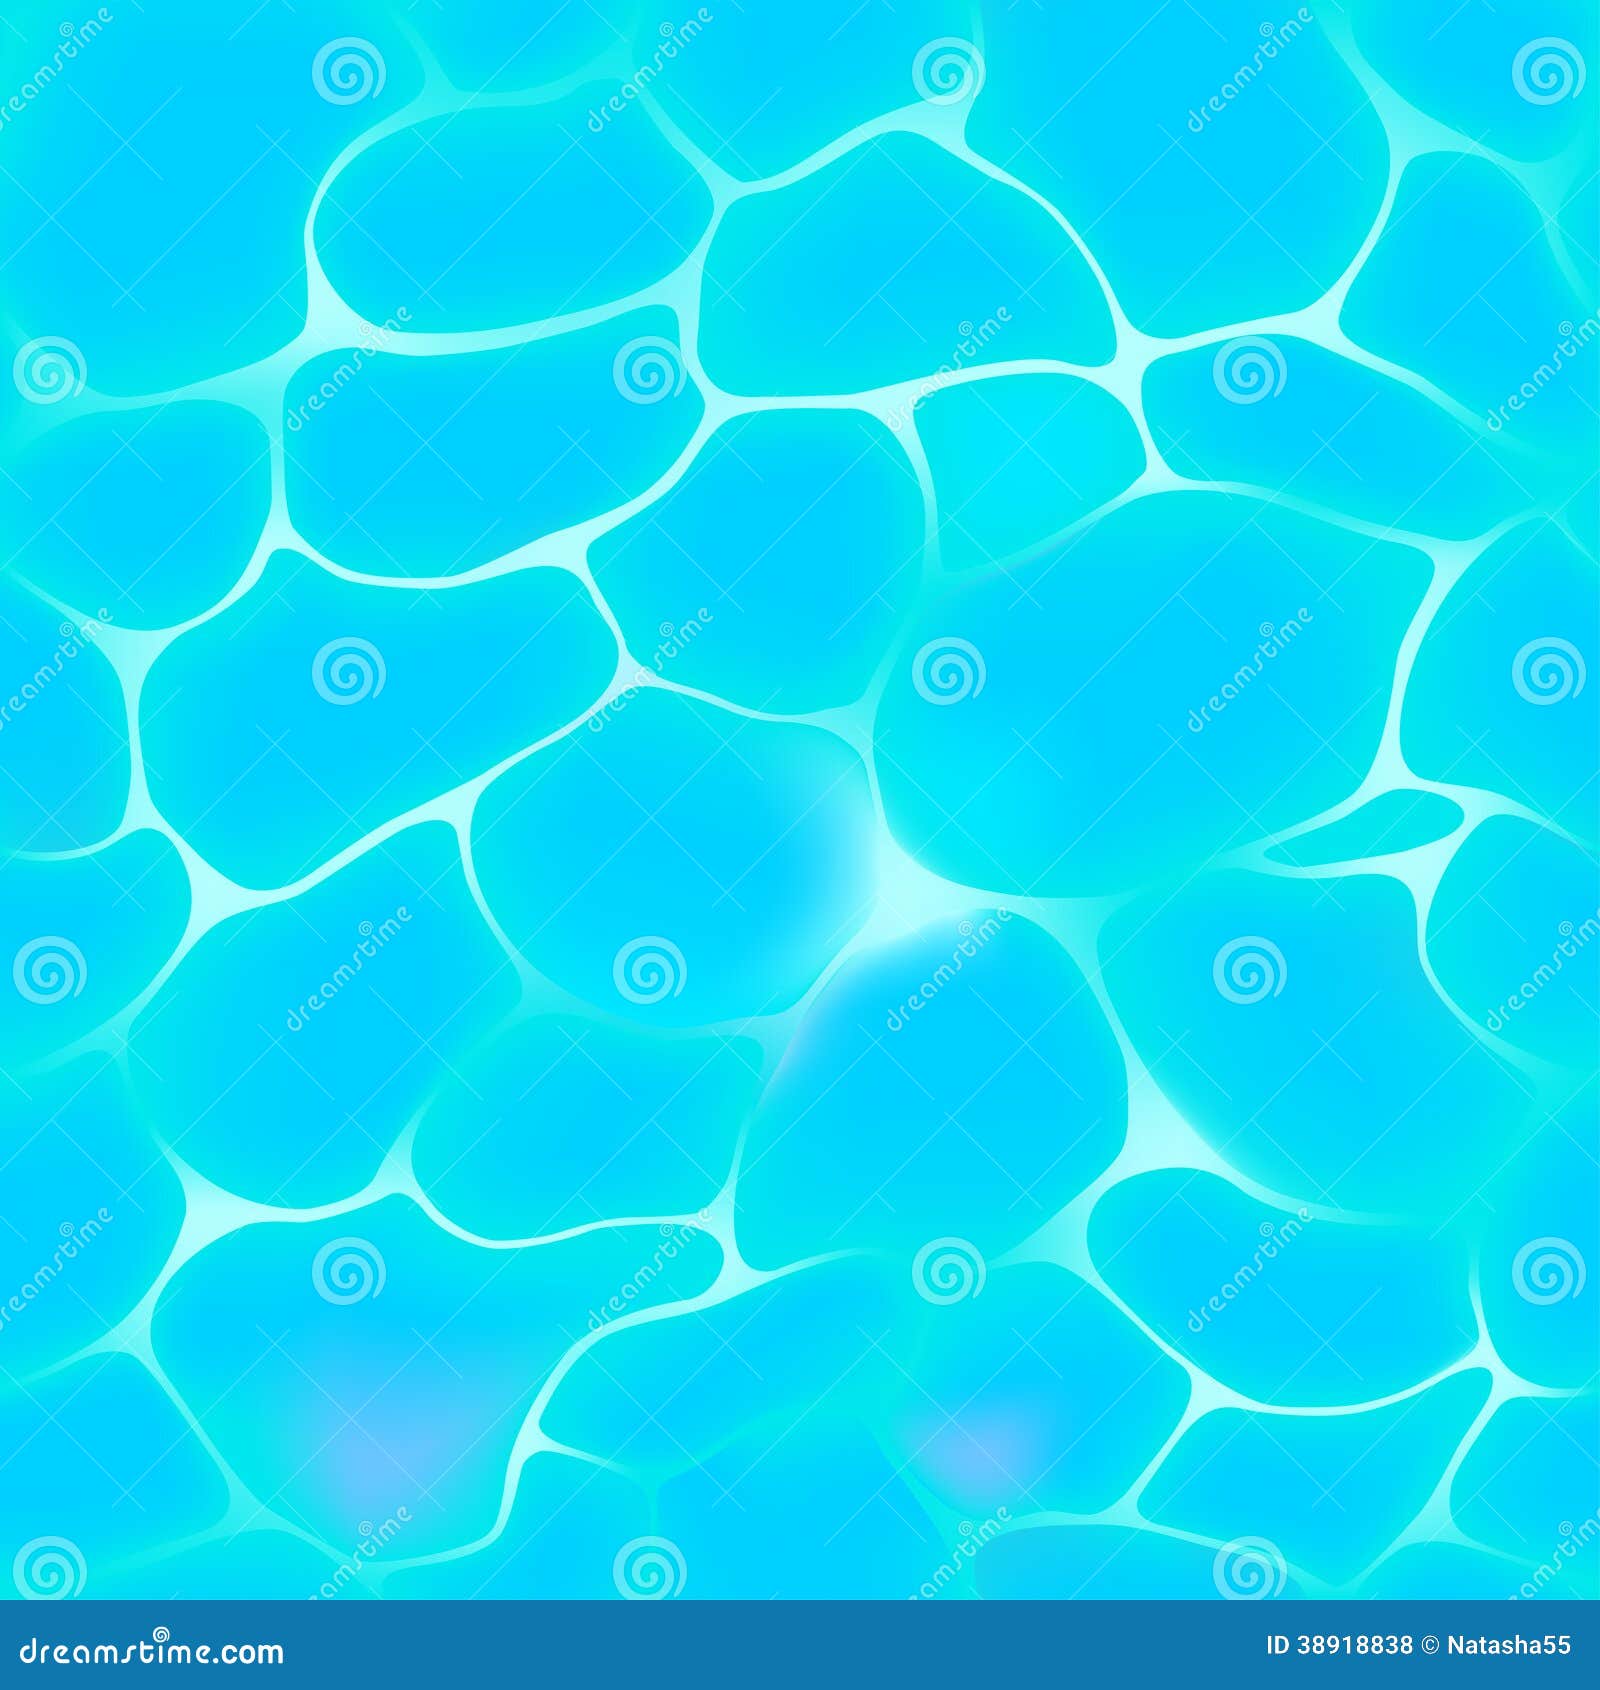 Seamless Pattern Of Blue Water In Pool Stock Vector Illustration Of Liquid Sunlight 38918838